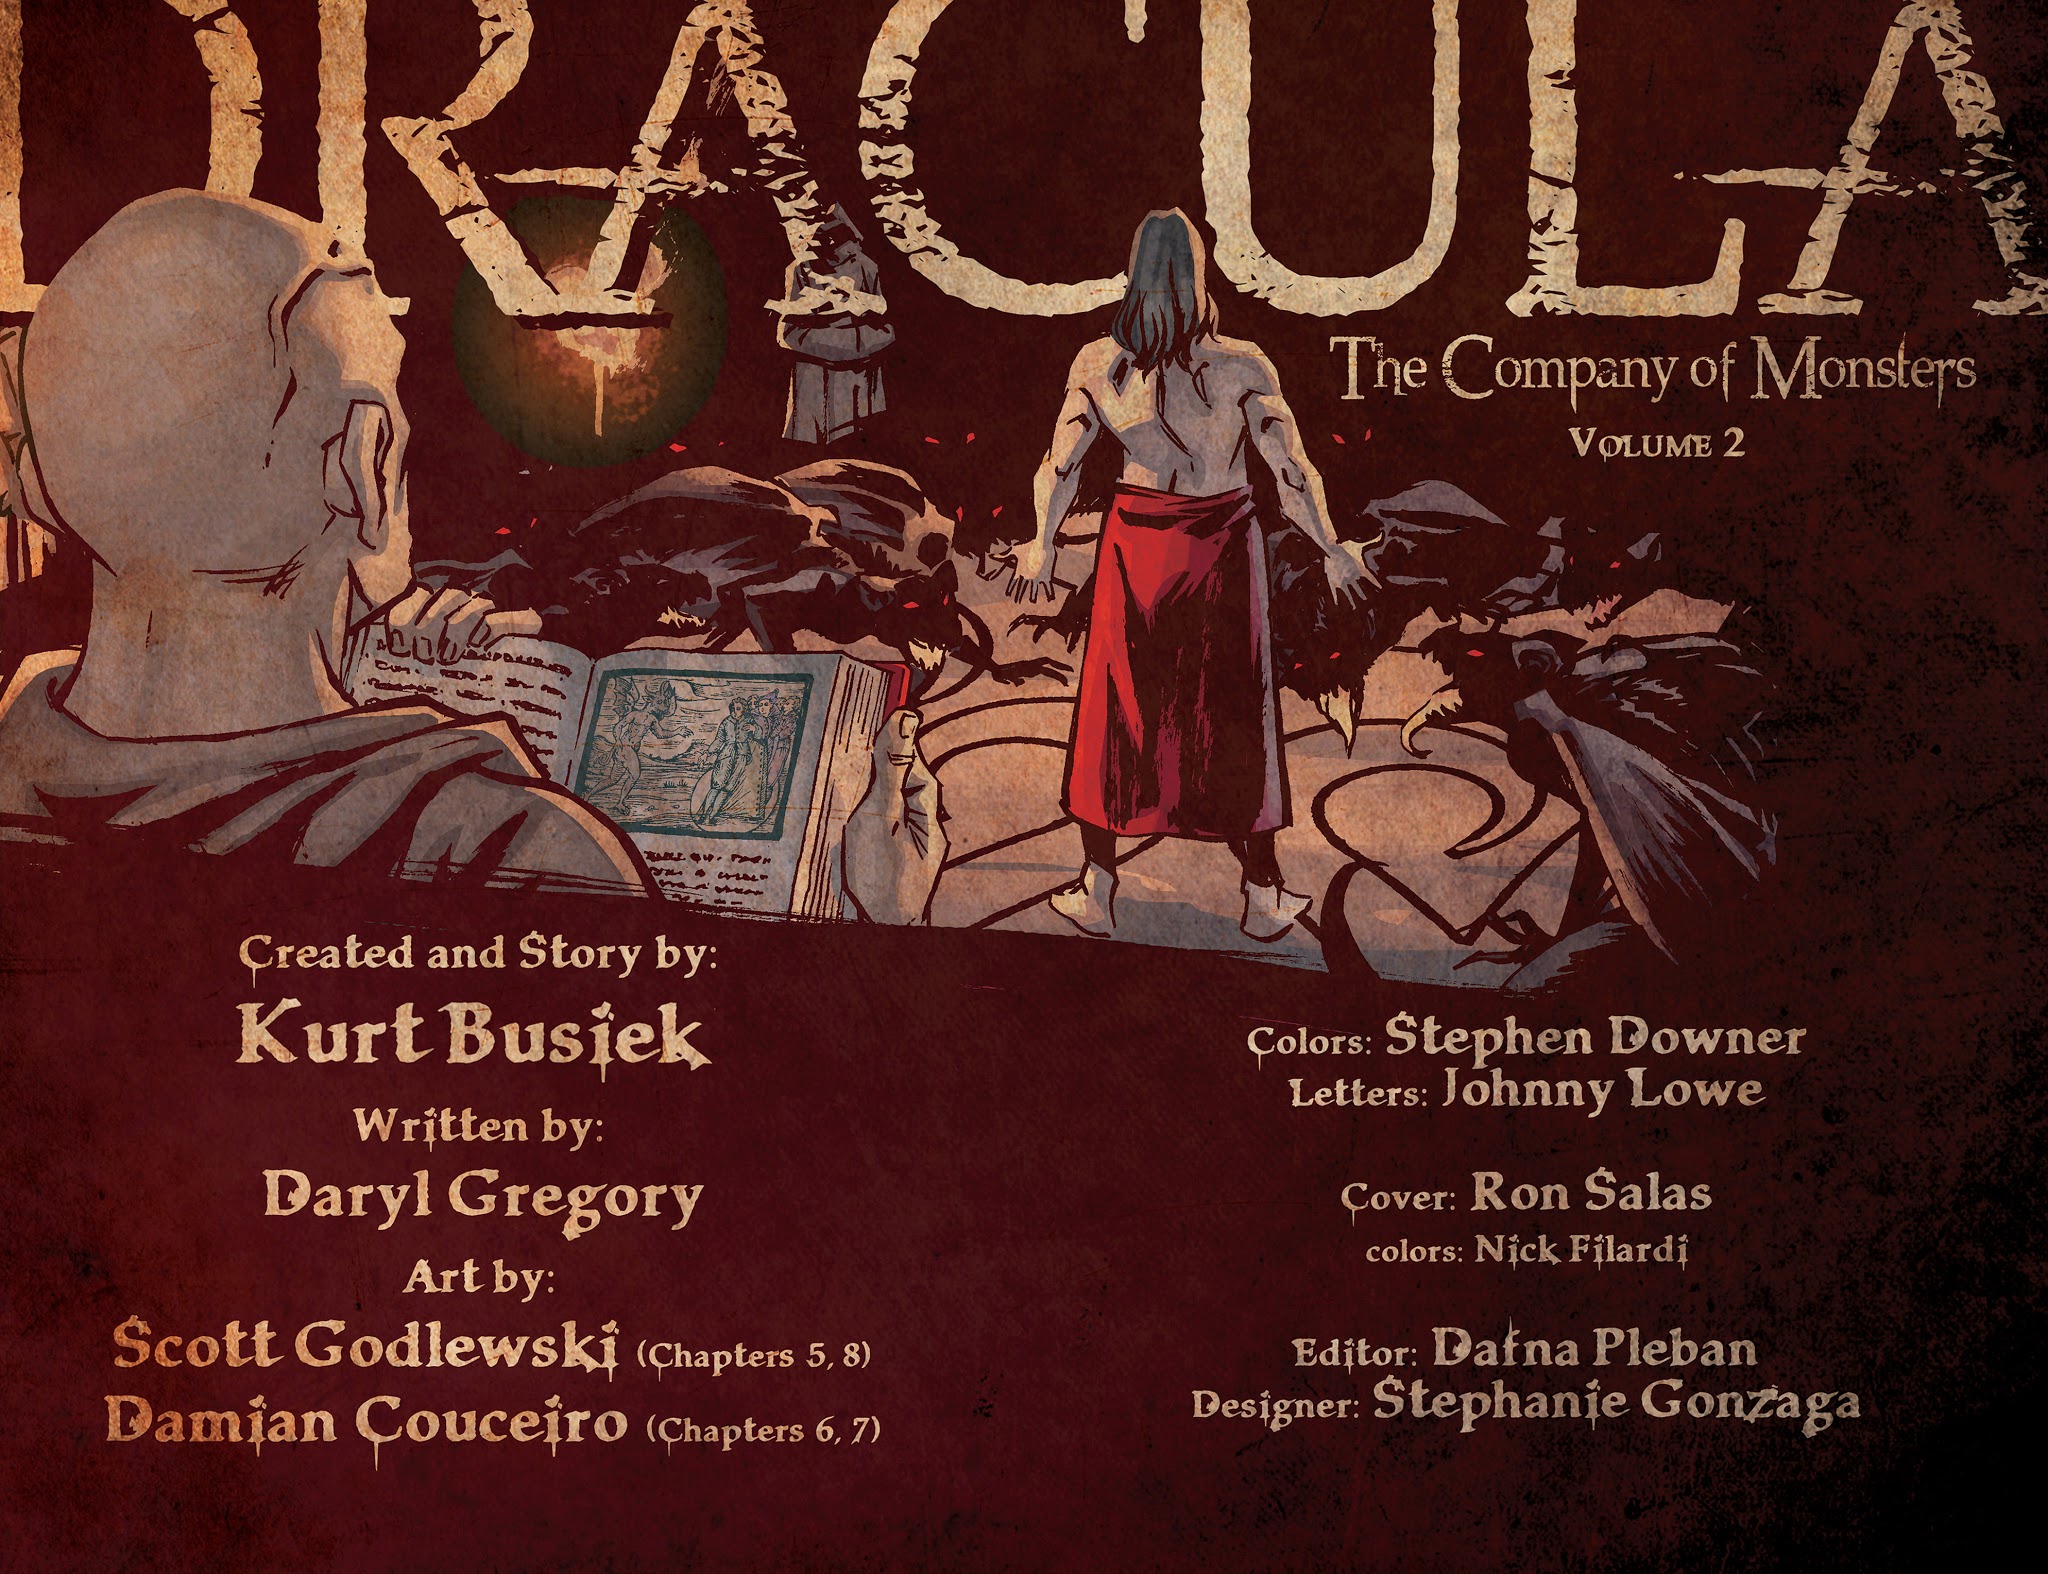 Read online Dracula: The Company of Monsters comic -  Issue # TPB 2 - 4